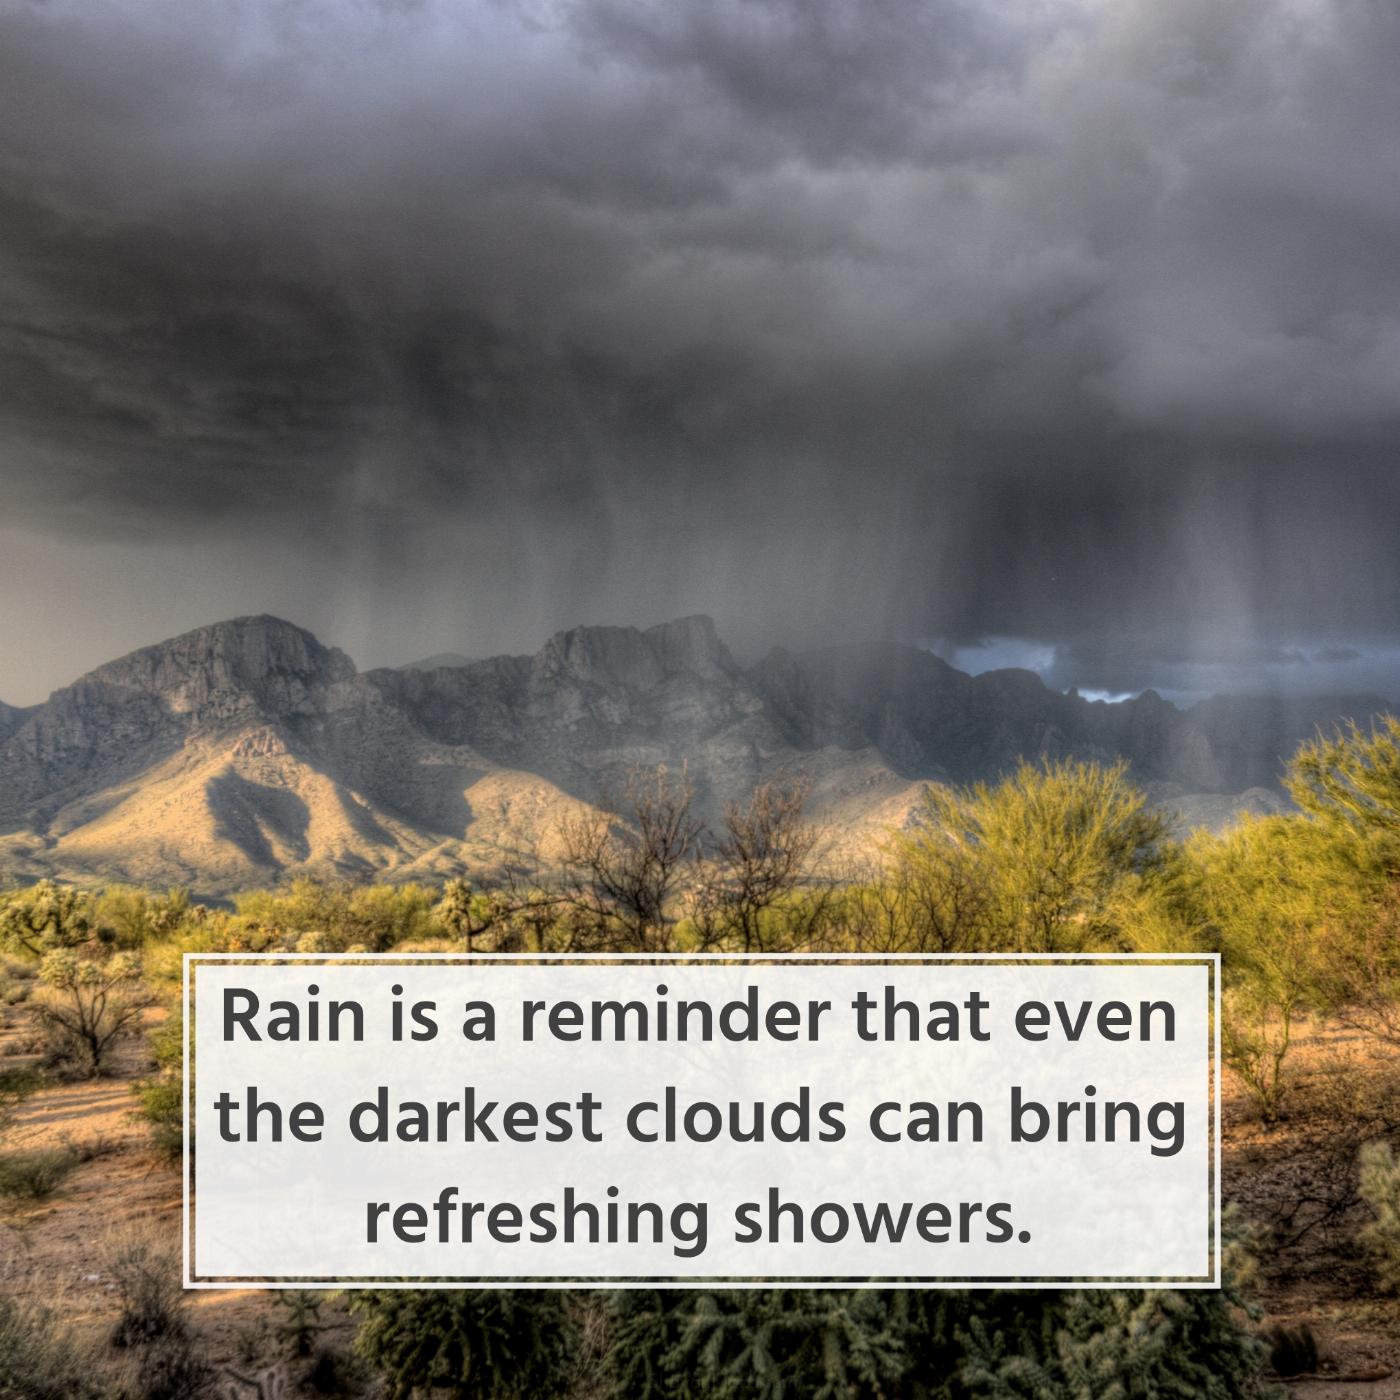 Rain is a reminder that even the darkest clouds can bring